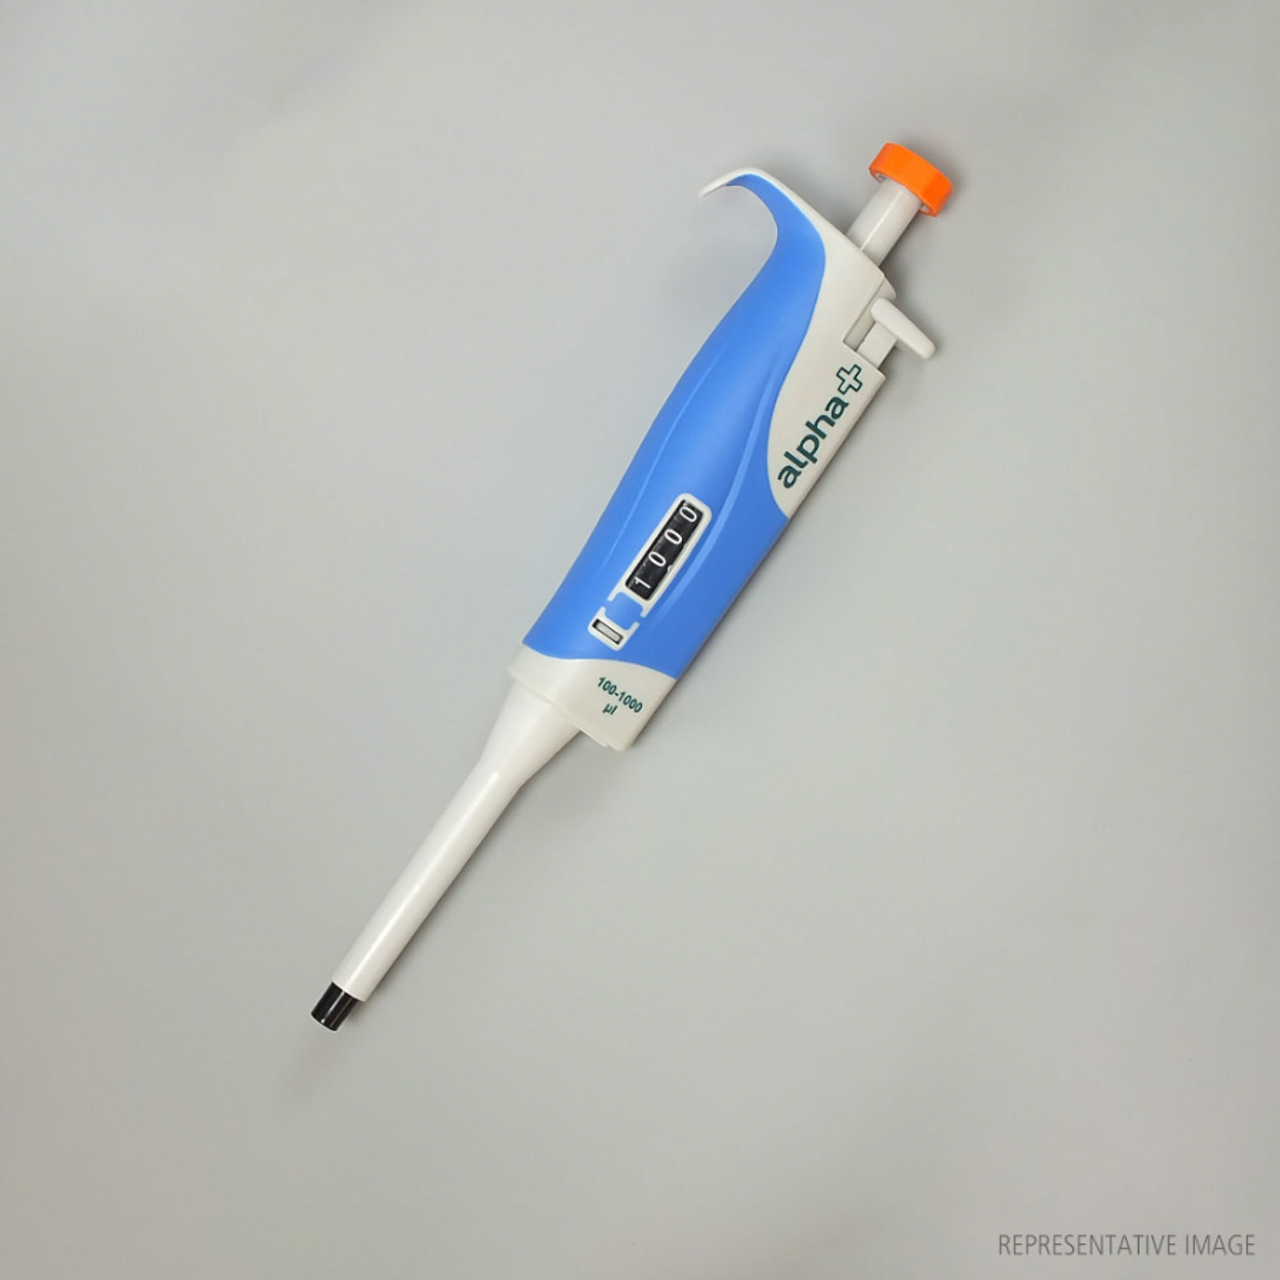 Alpha+ single channel 500 to 5000µl variable volume pipette